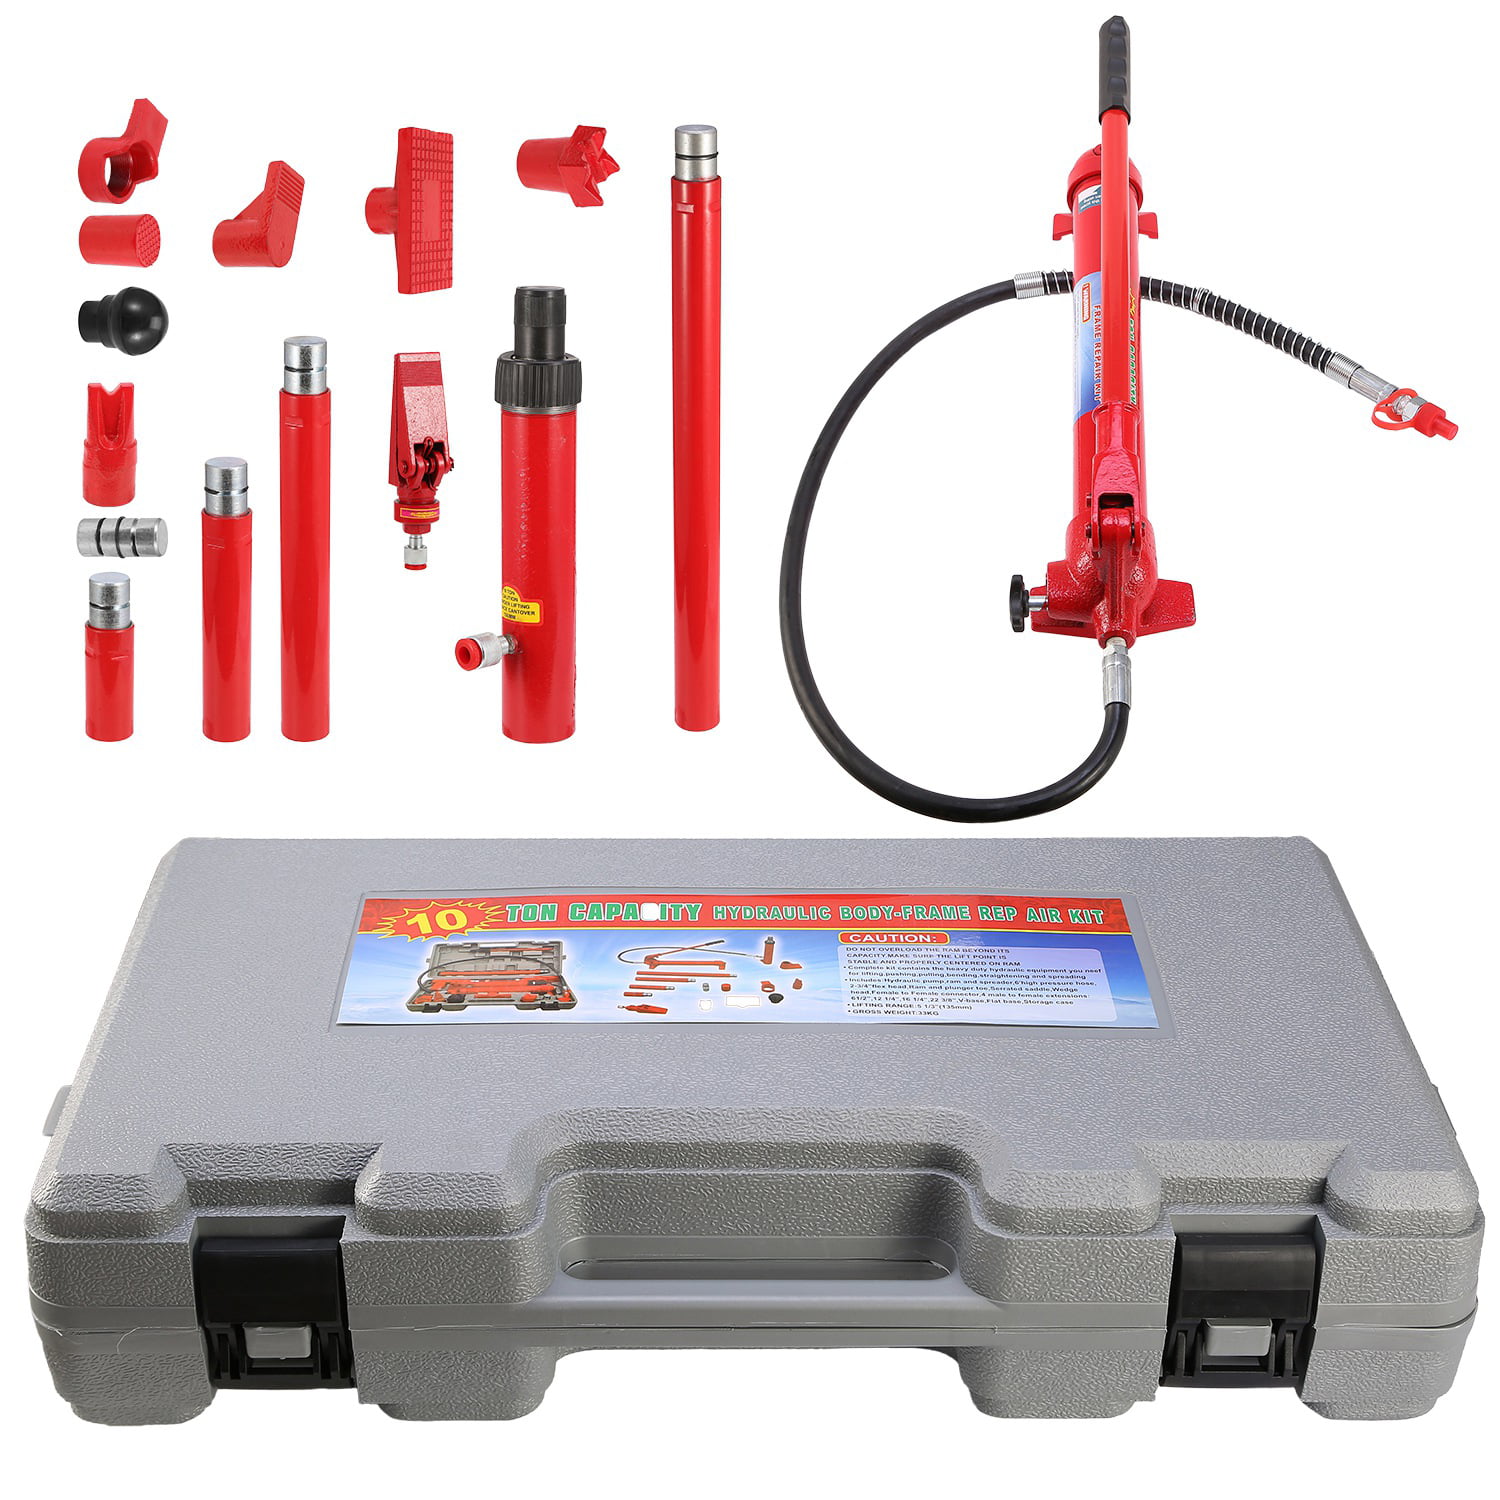 Sanny Hydraulic Jack Hand Pump Ram Replacement for Porta Power Body Shop Tool 